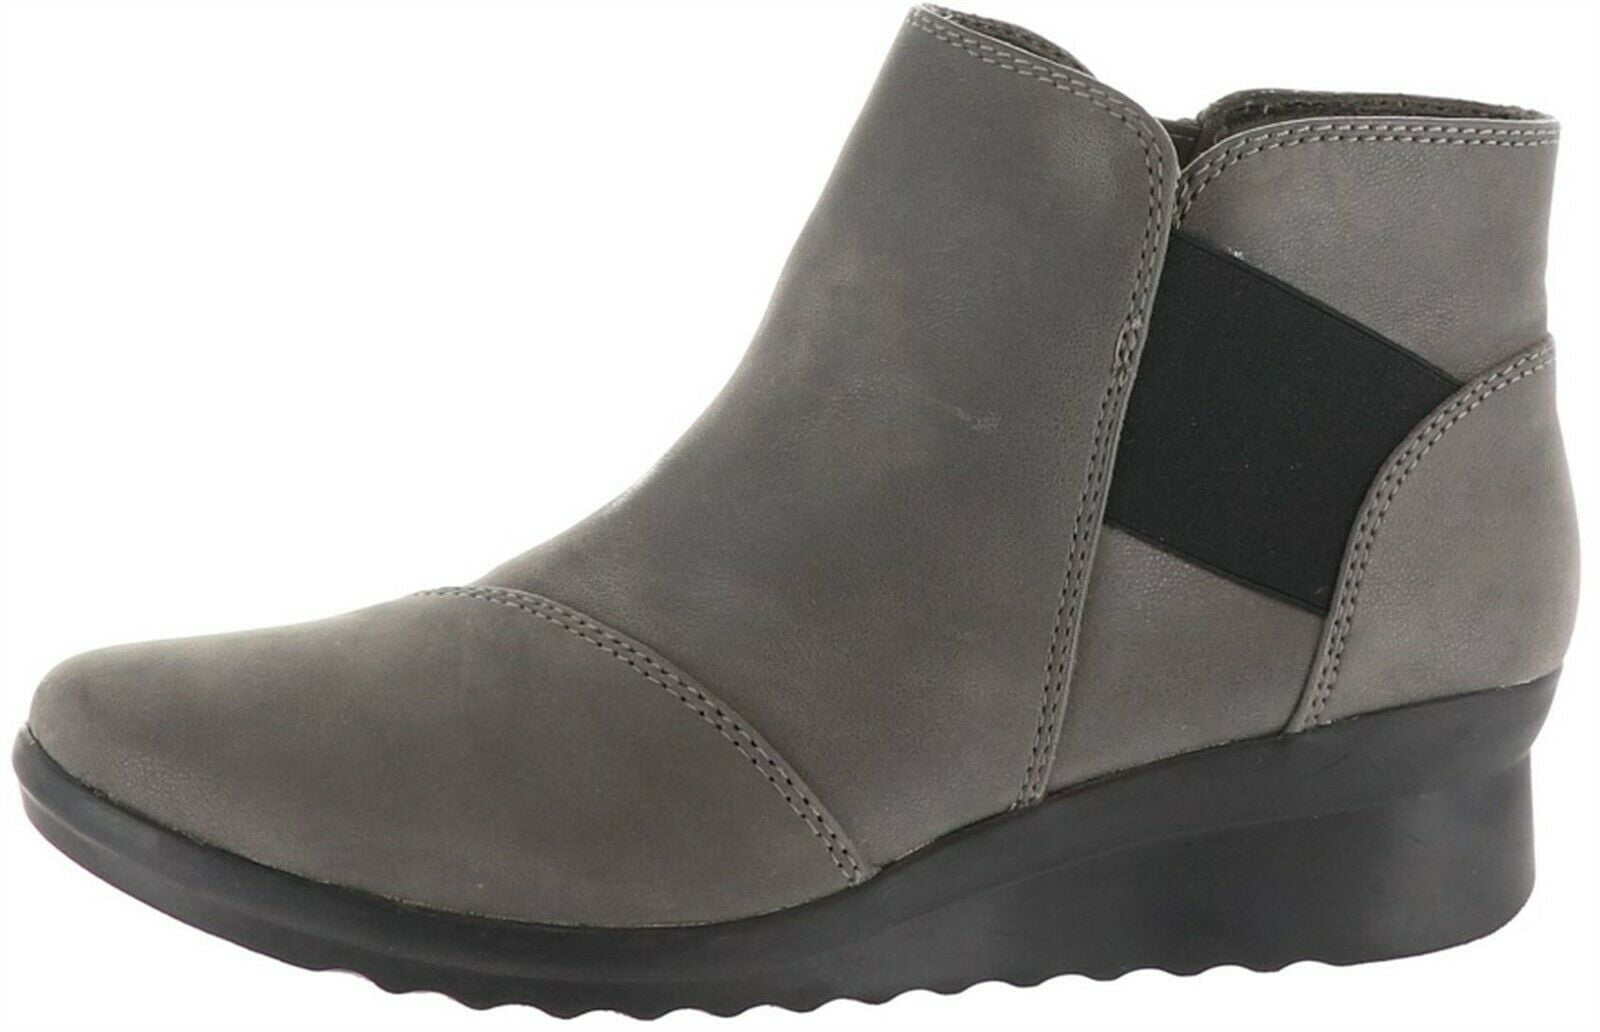 clarks cloudsteppers caddell tropic